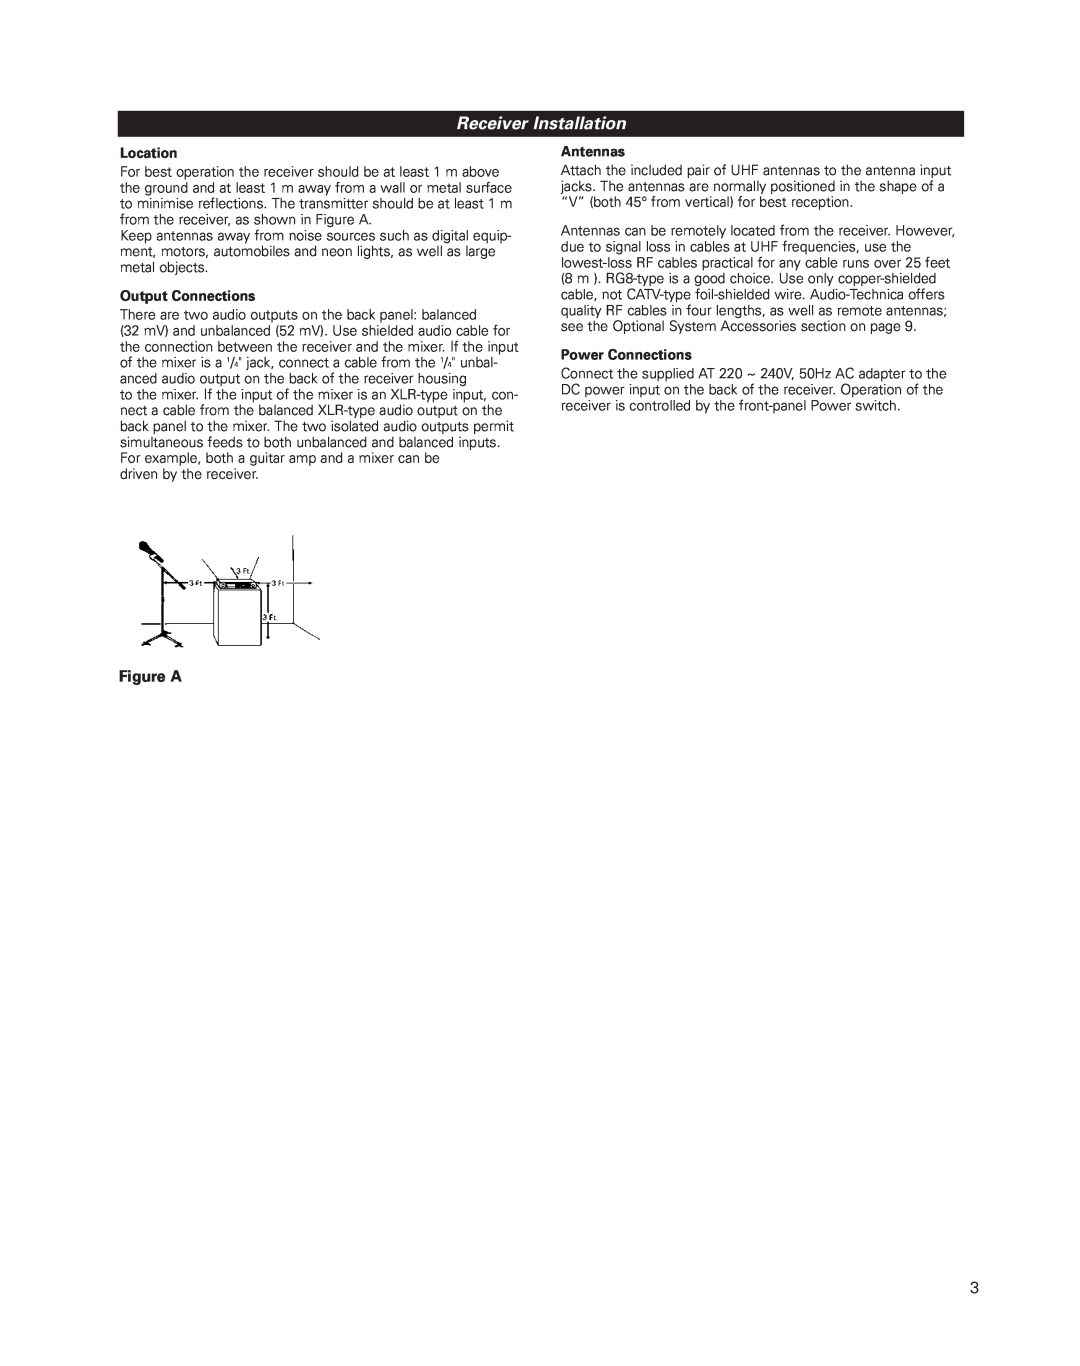 Audio-Technica uhf wireless systems manual Receiver Installation, Figure A, Location, Output Connections, Antennas 